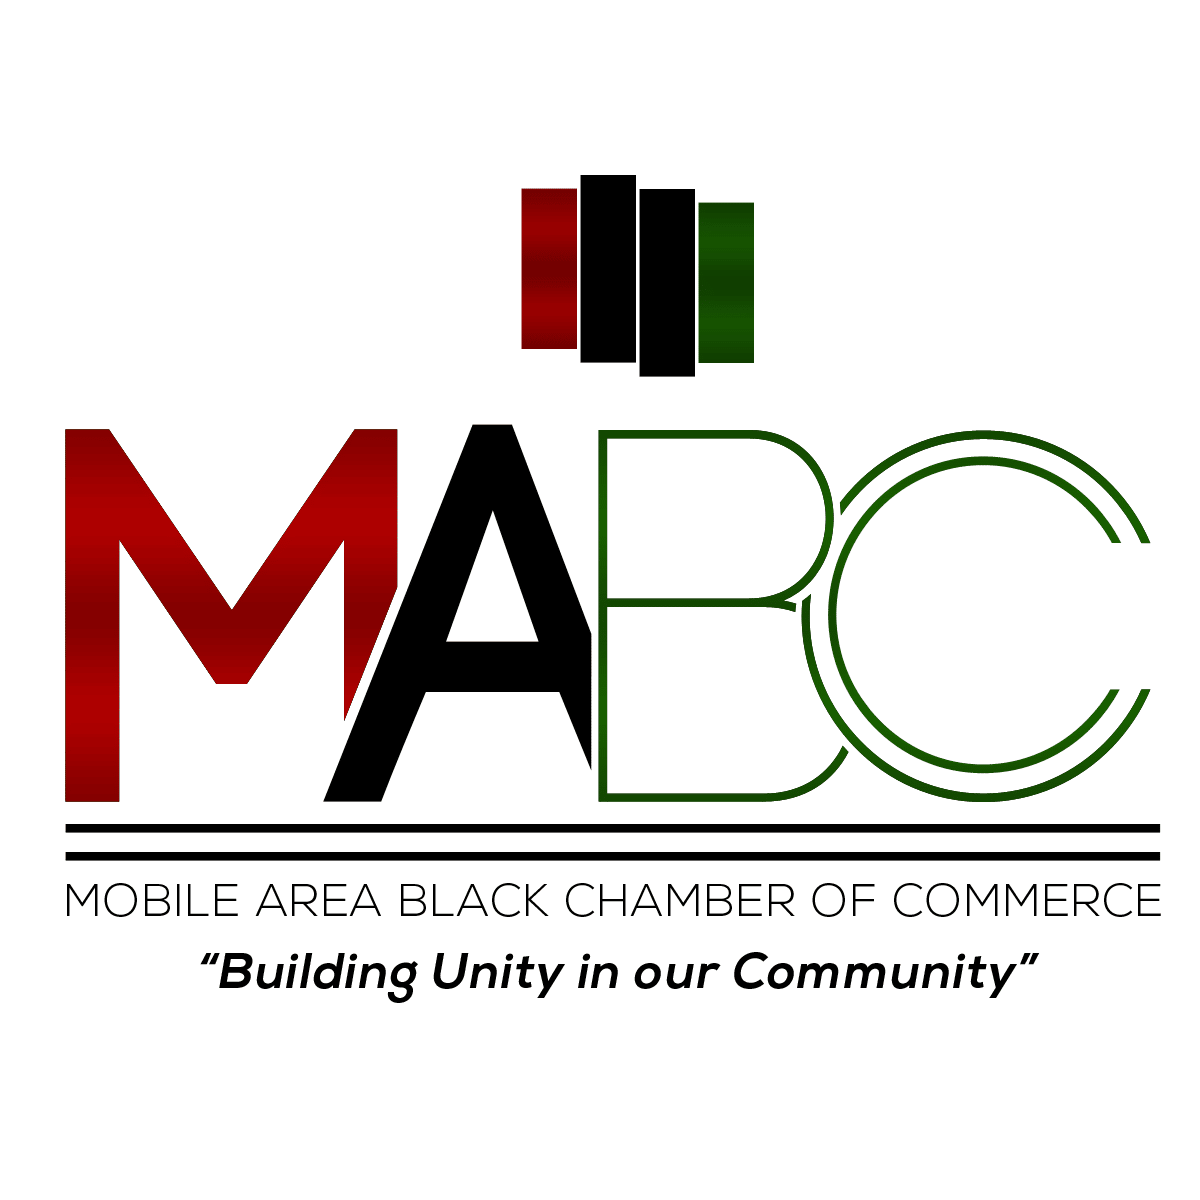 MABCC Hires, Adds Members and Plans Reception